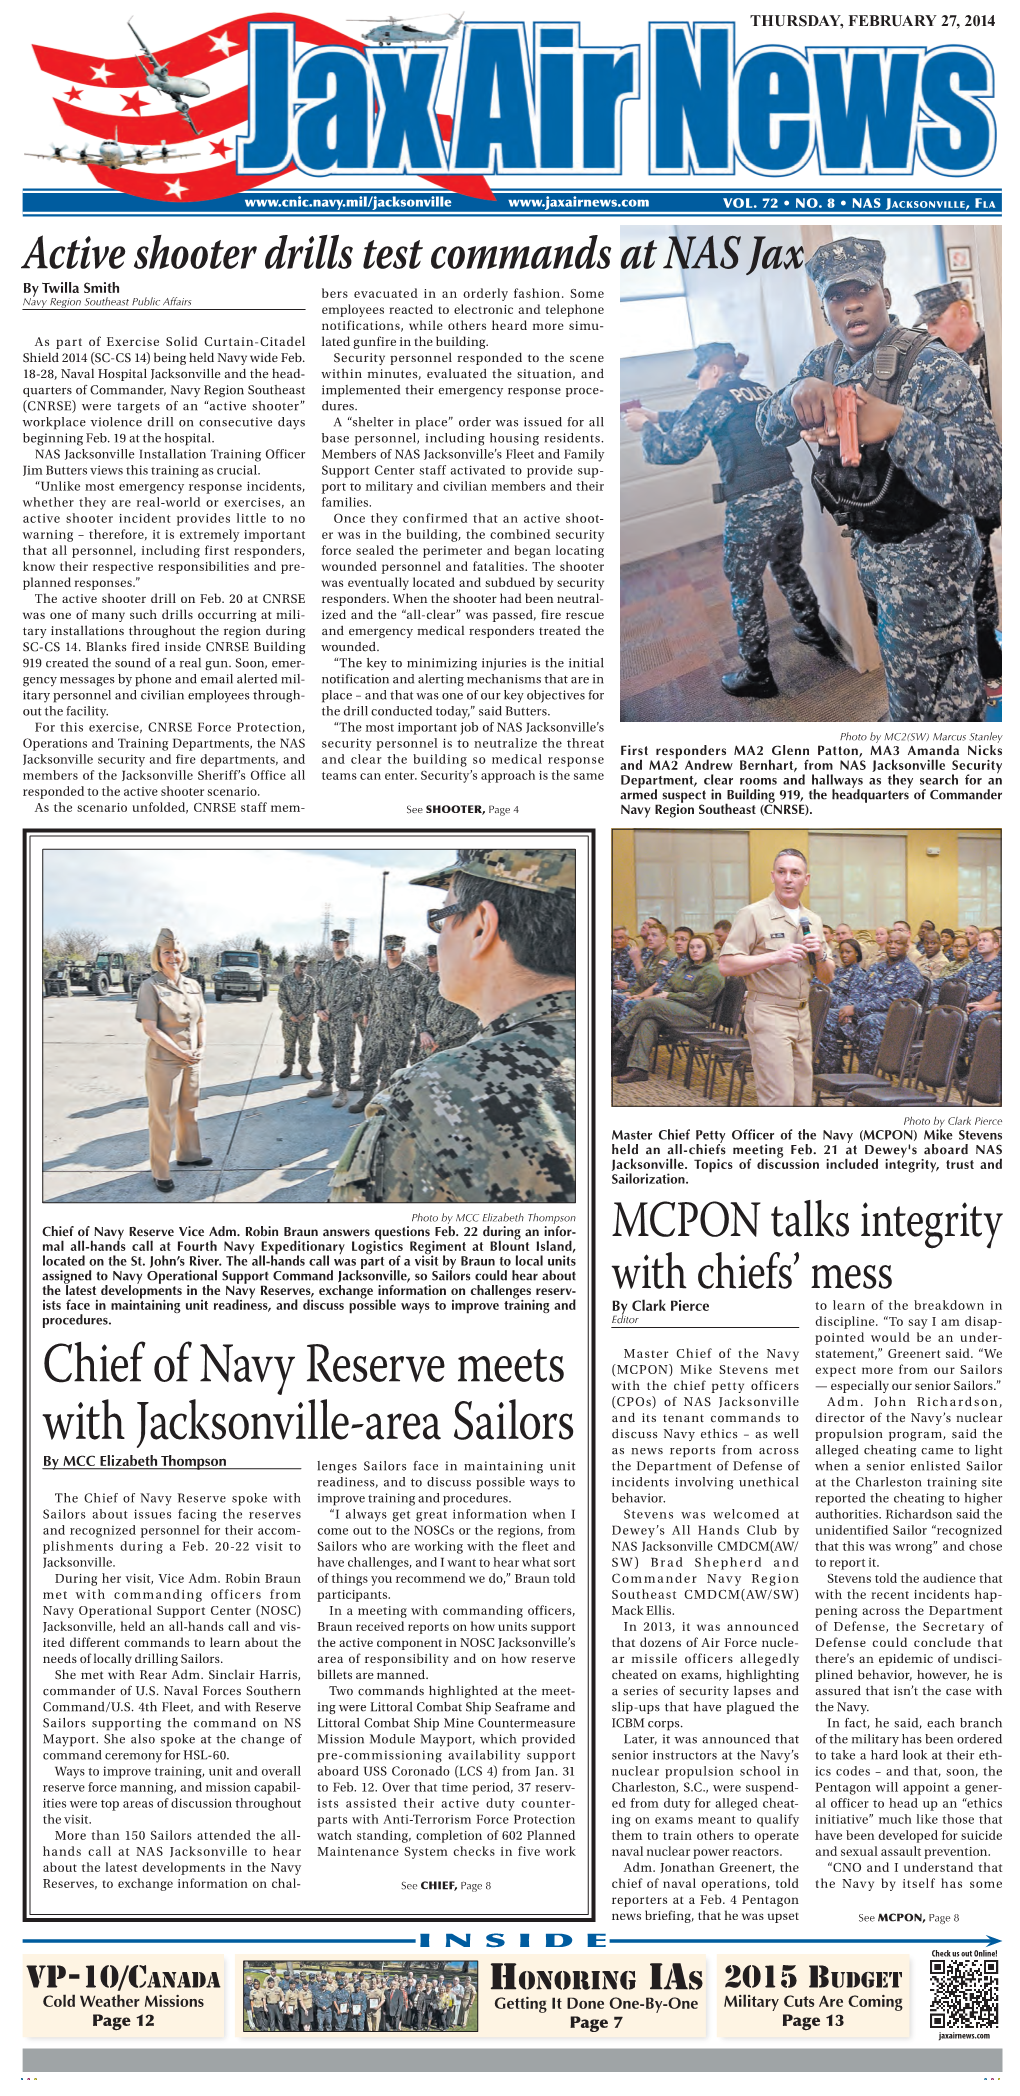 Chief of Navy Reserve Meets with Jacksonville-Area Sailors